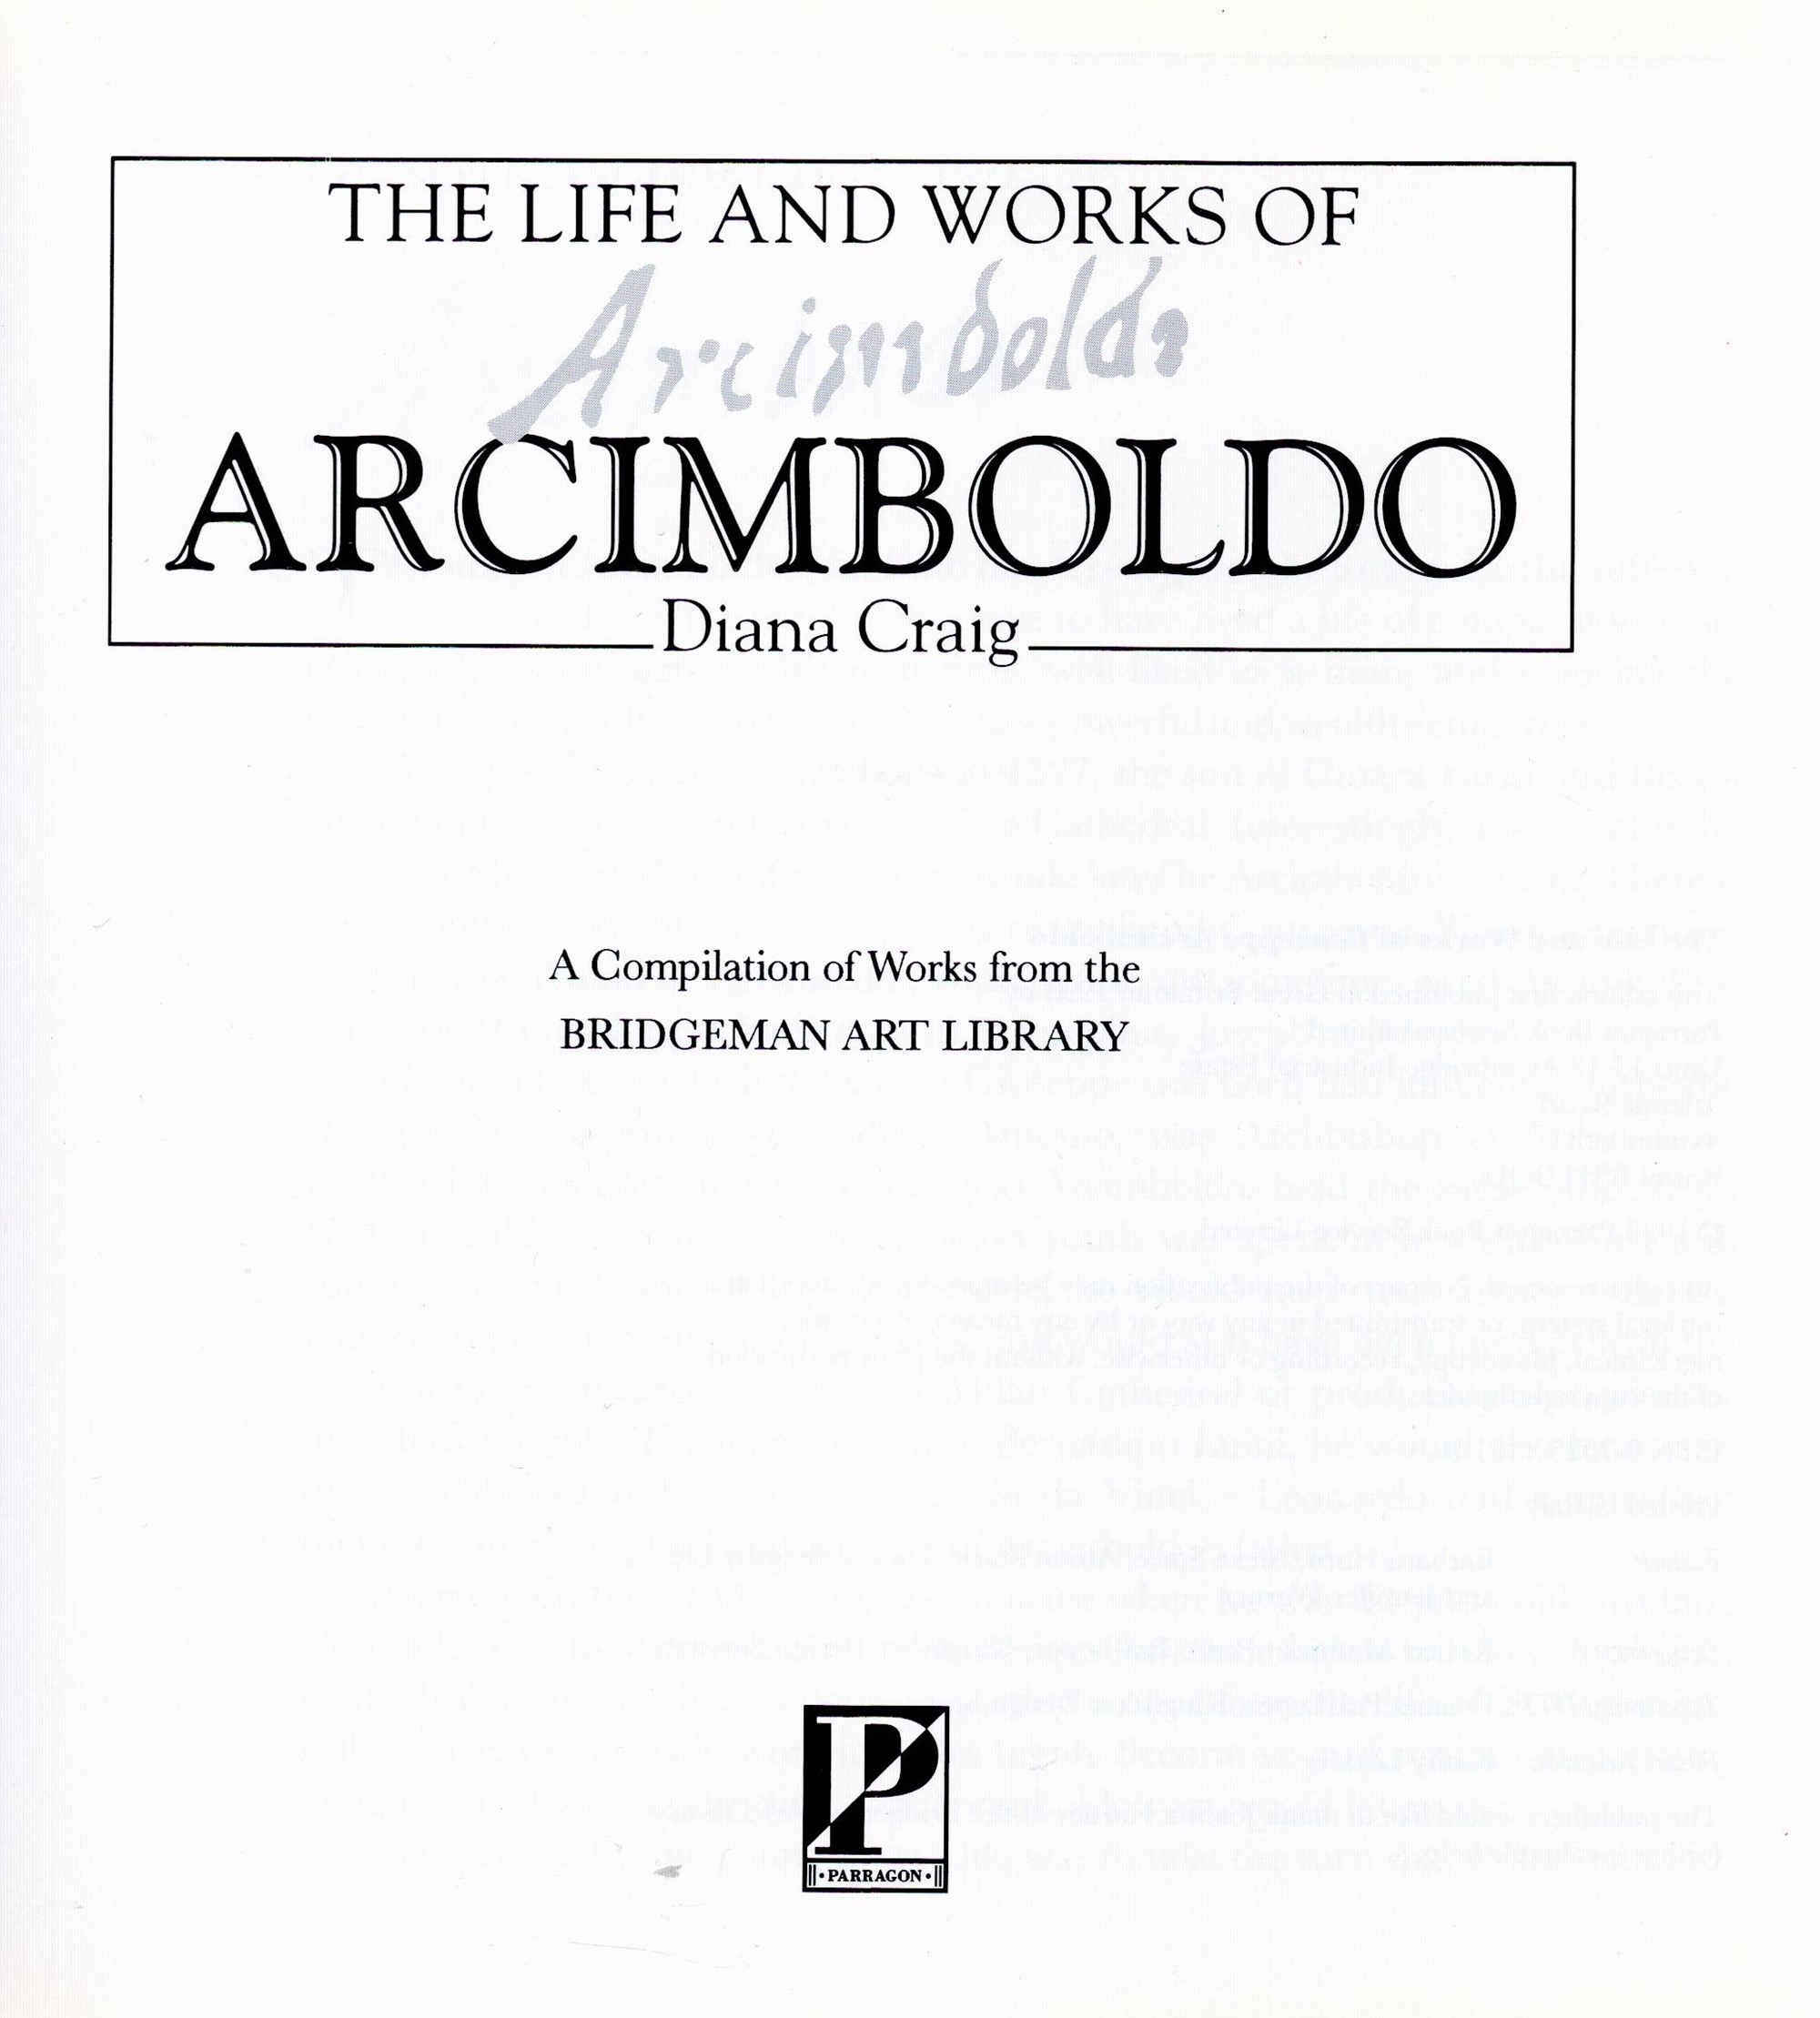 The Life and Works of Arcimboldo by Diana Craig Hardback Book 1996 First Edition published by - Image 4 of 6